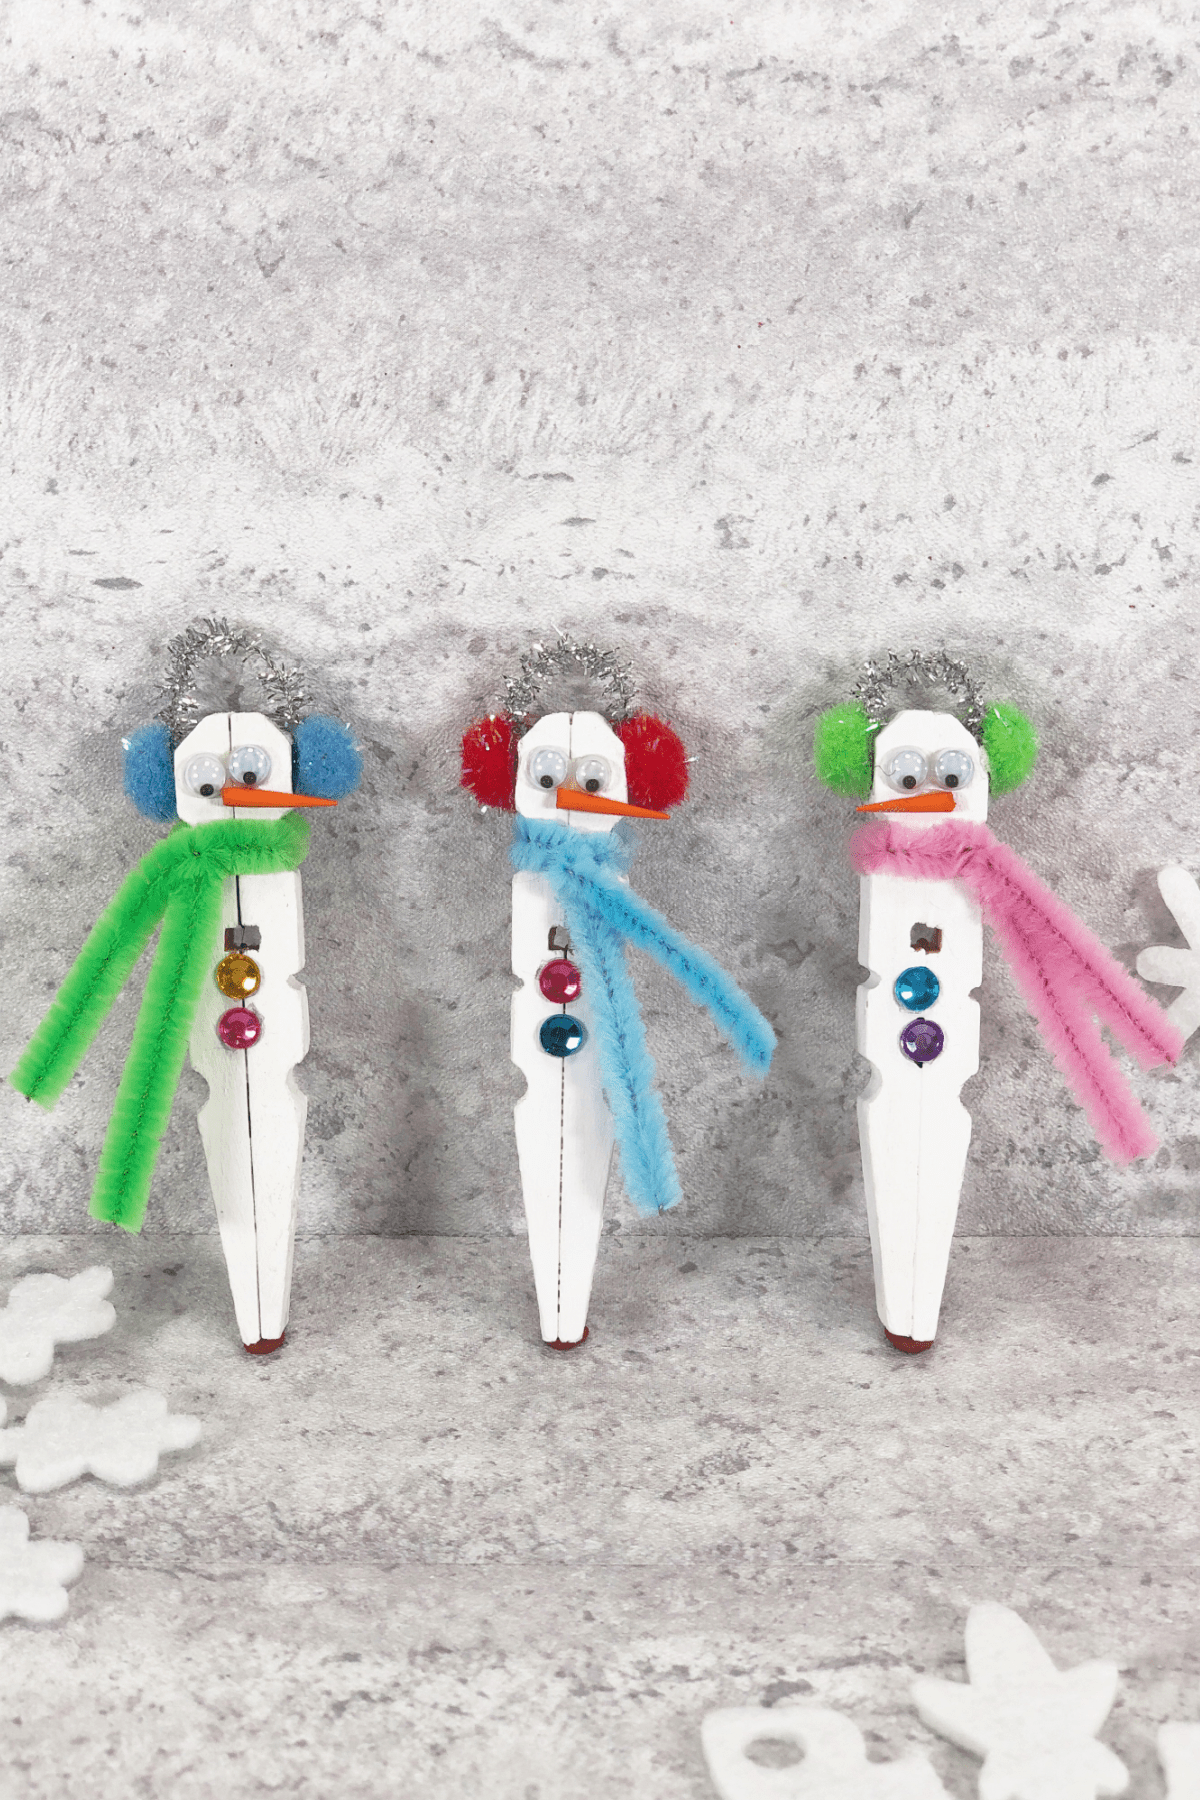 Snowman crafts for winter